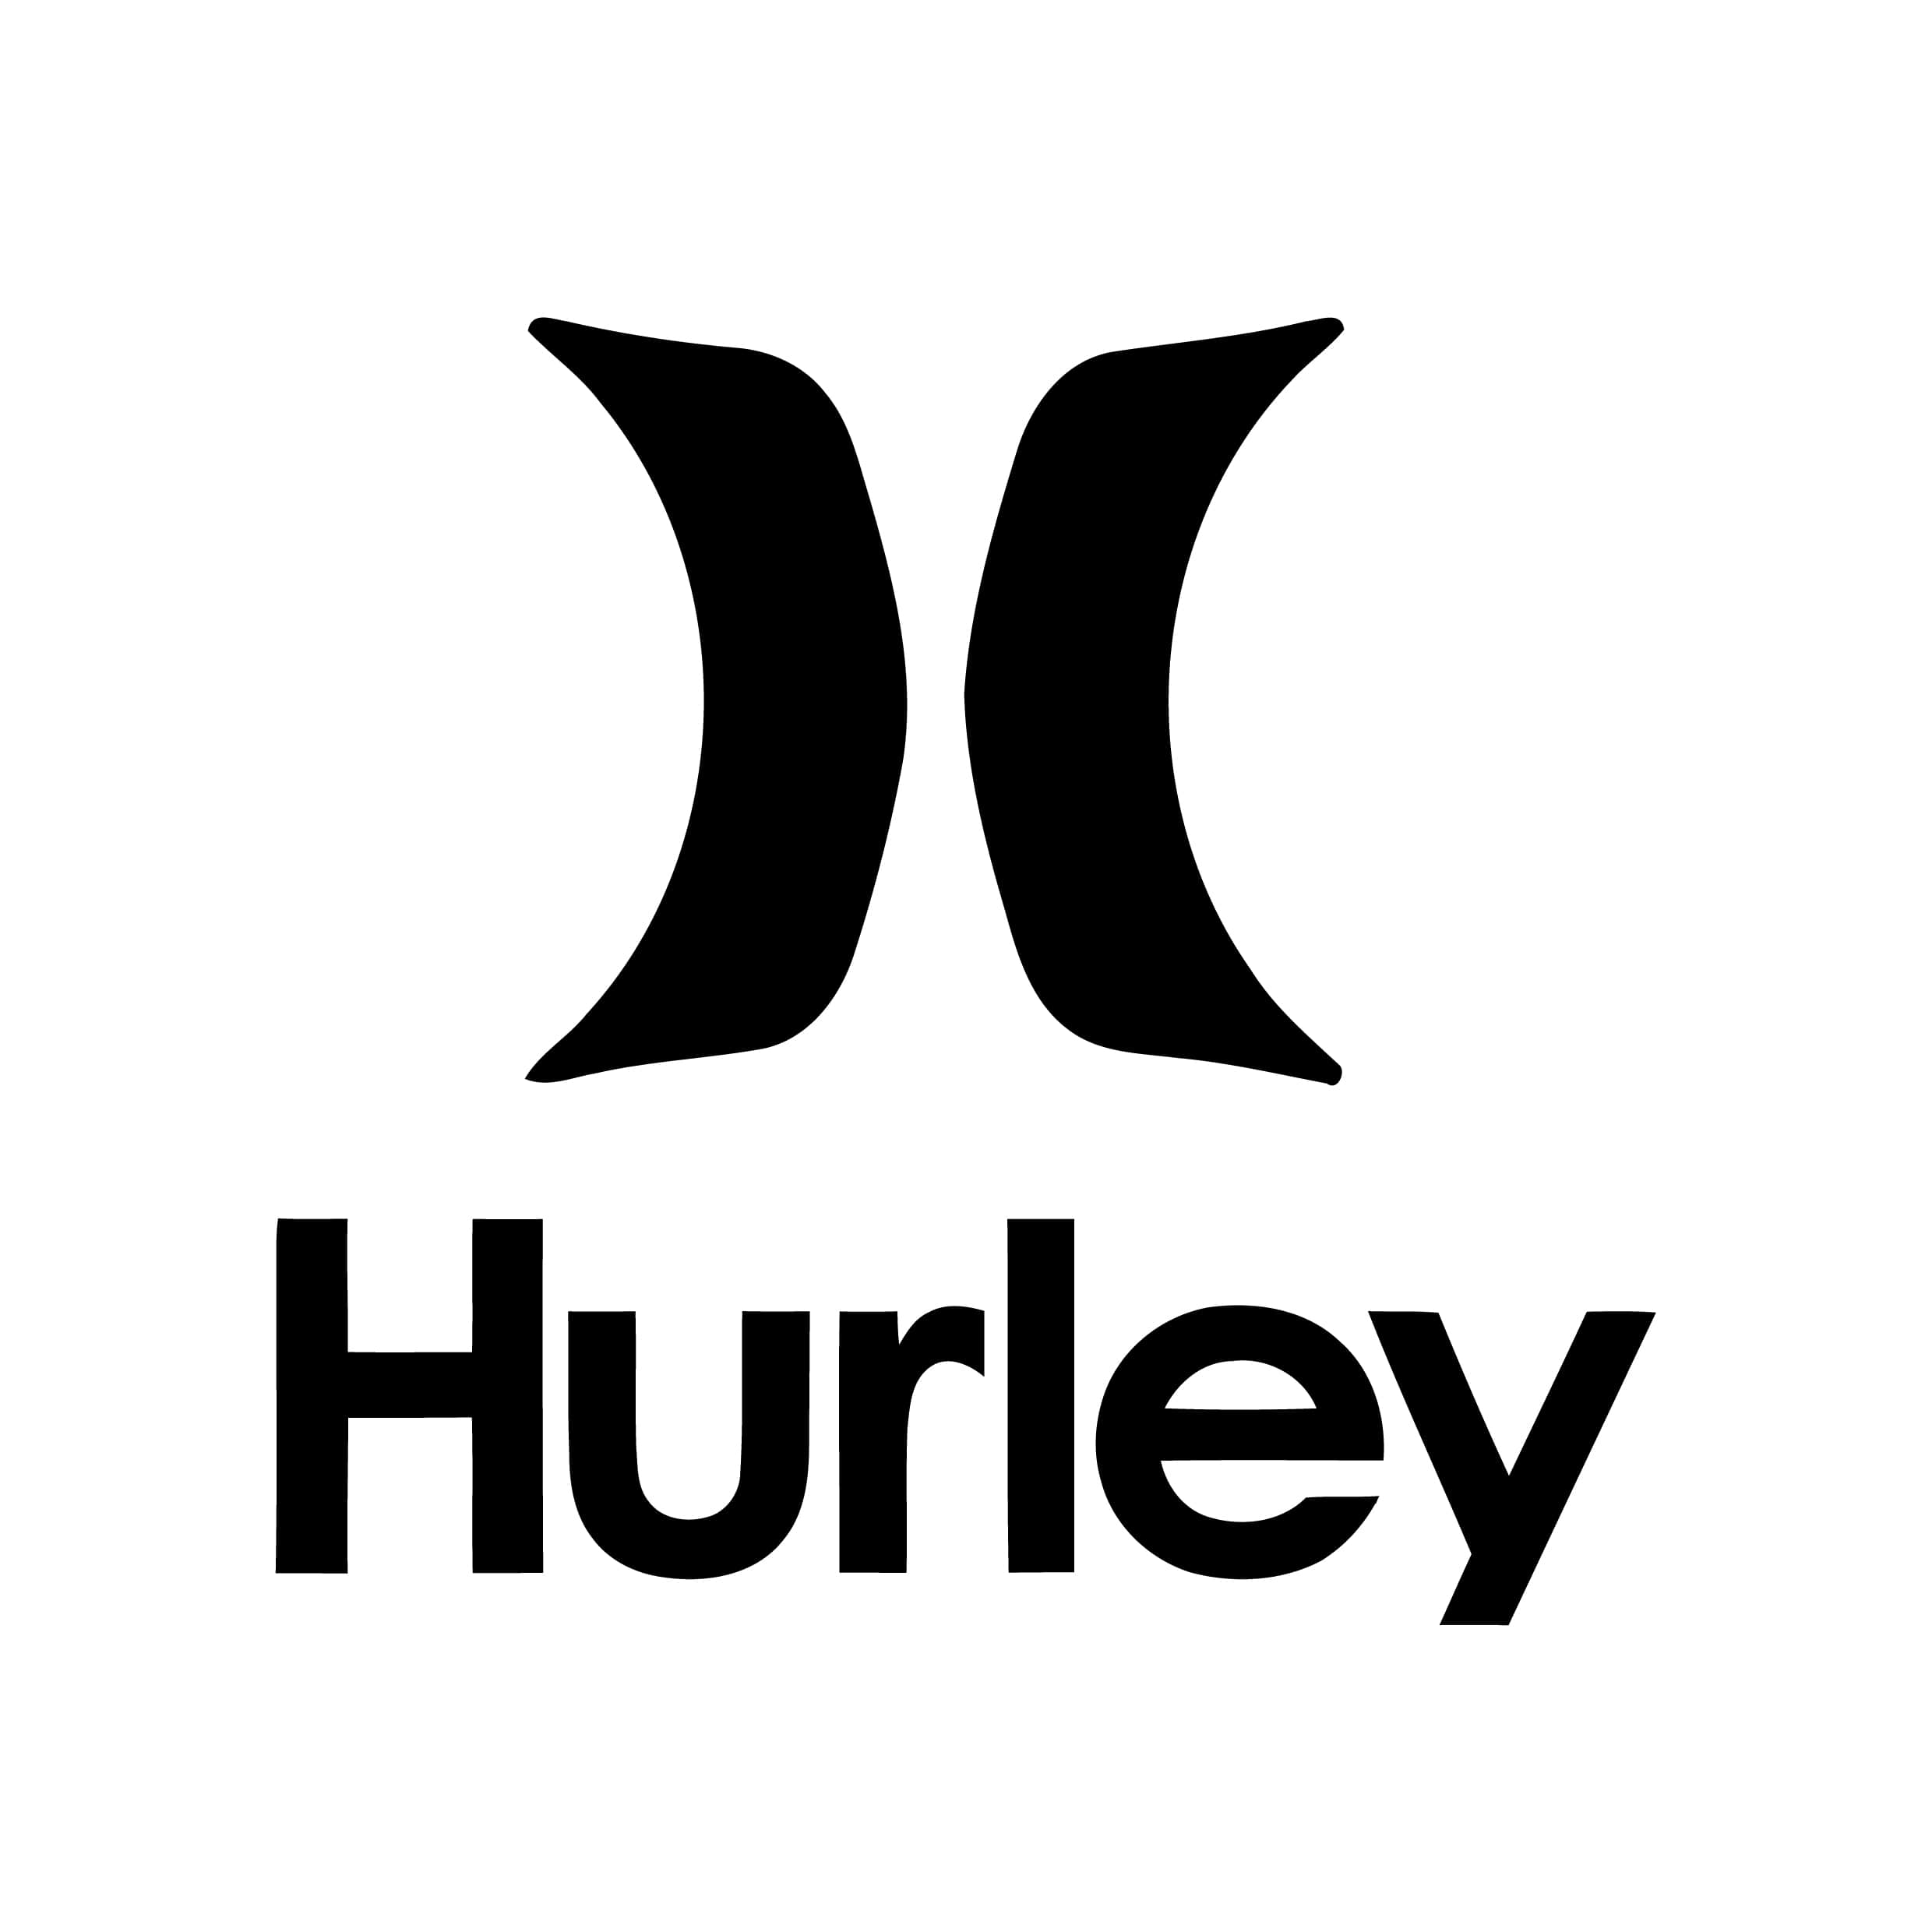 stickers-hurley-ref3-autocollant-surf-body-board-sticker-mer-vague-sport-extreme-logo-planche-autocollants-decals-riding-sponsors-min